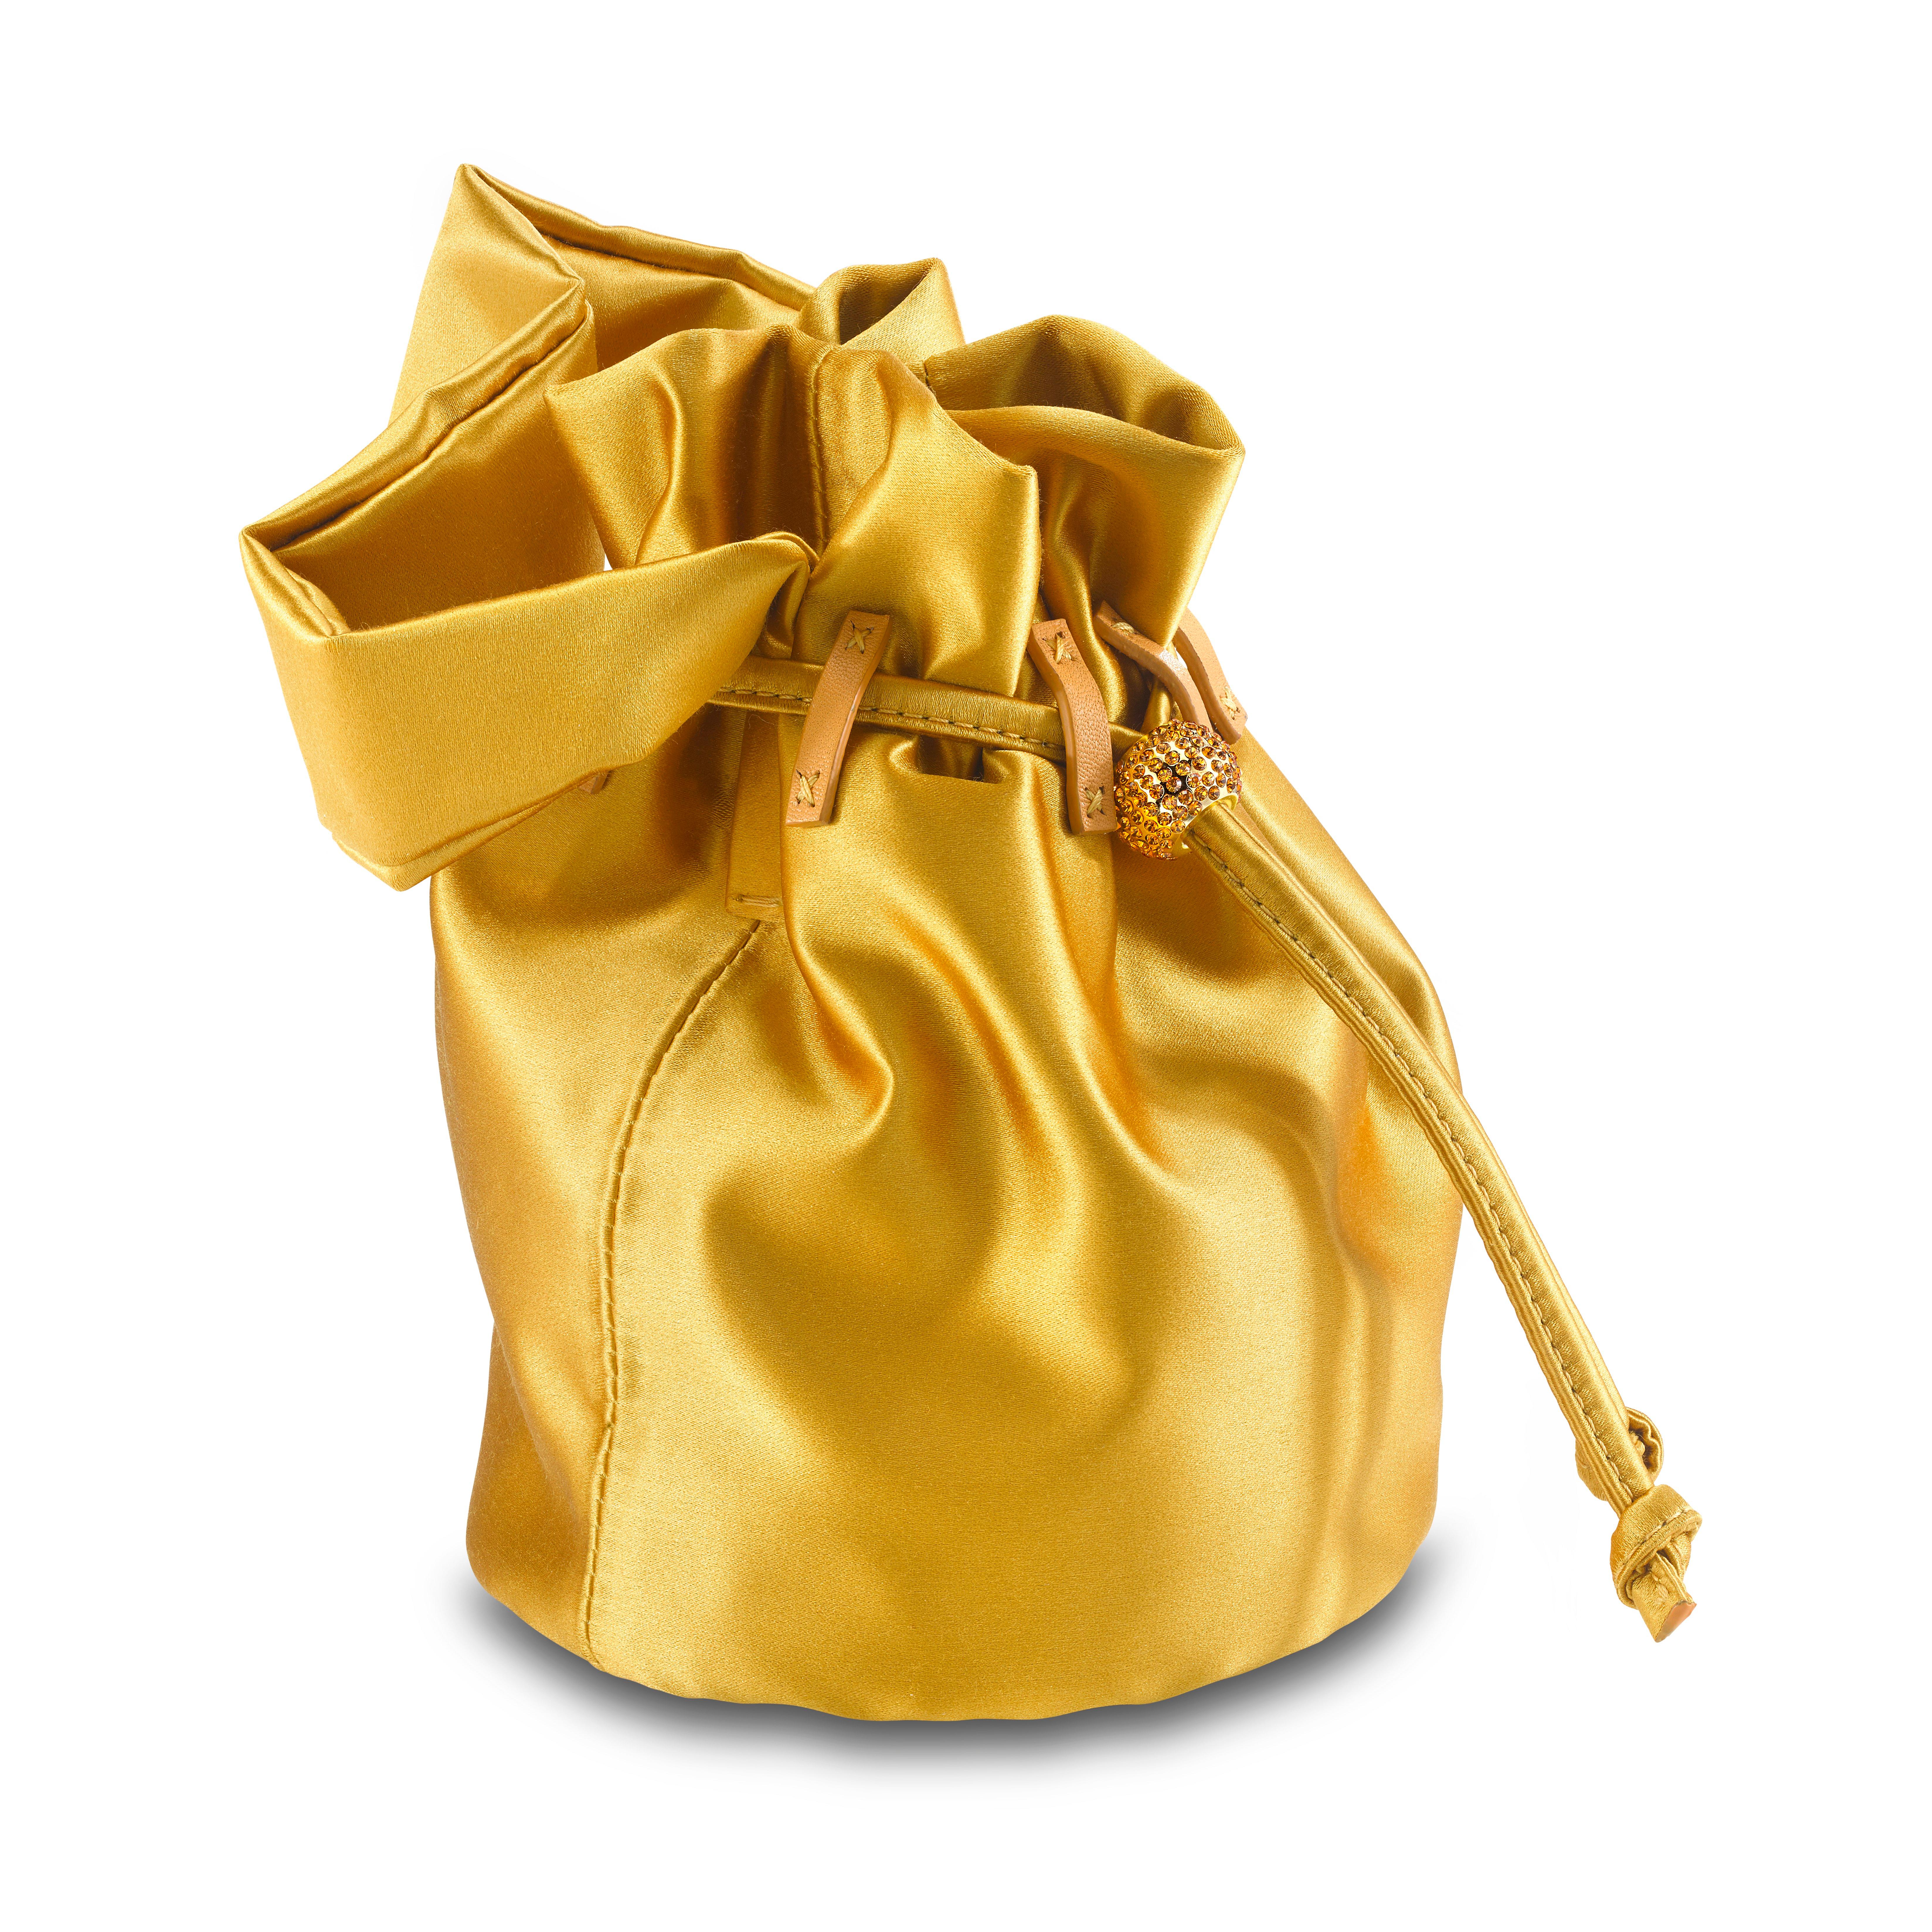 The Grace Mini is featured in our Canary satin. This soft pouch has a satin handle and drawstring closure. The closure is embellished with Swarovski crystals and gold hardware. It fits the large iPhone, has interior card slots and features our